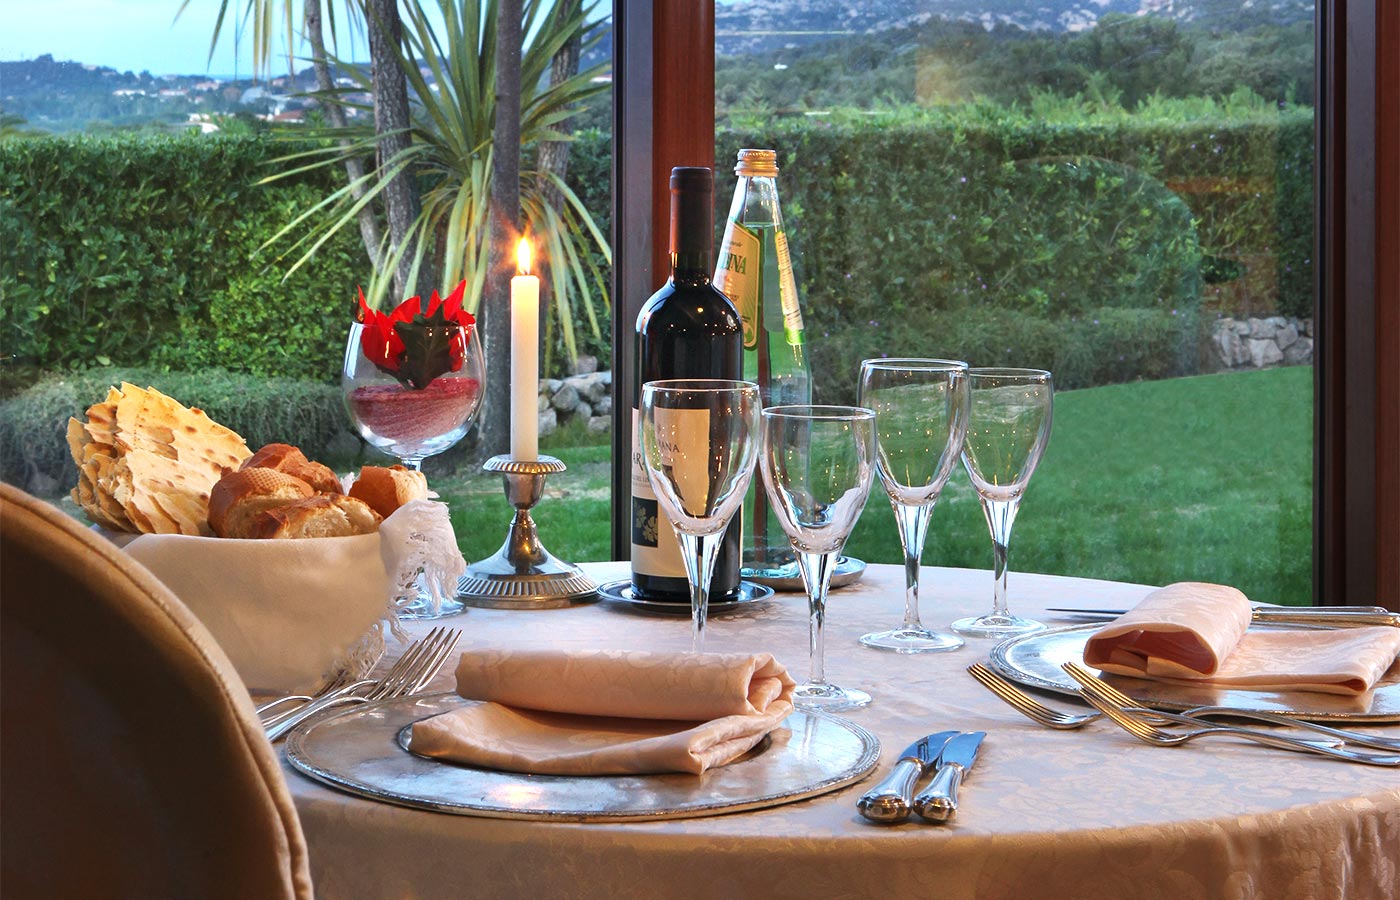 A refined dinner in one of the best restaurants of Costa Smeralda